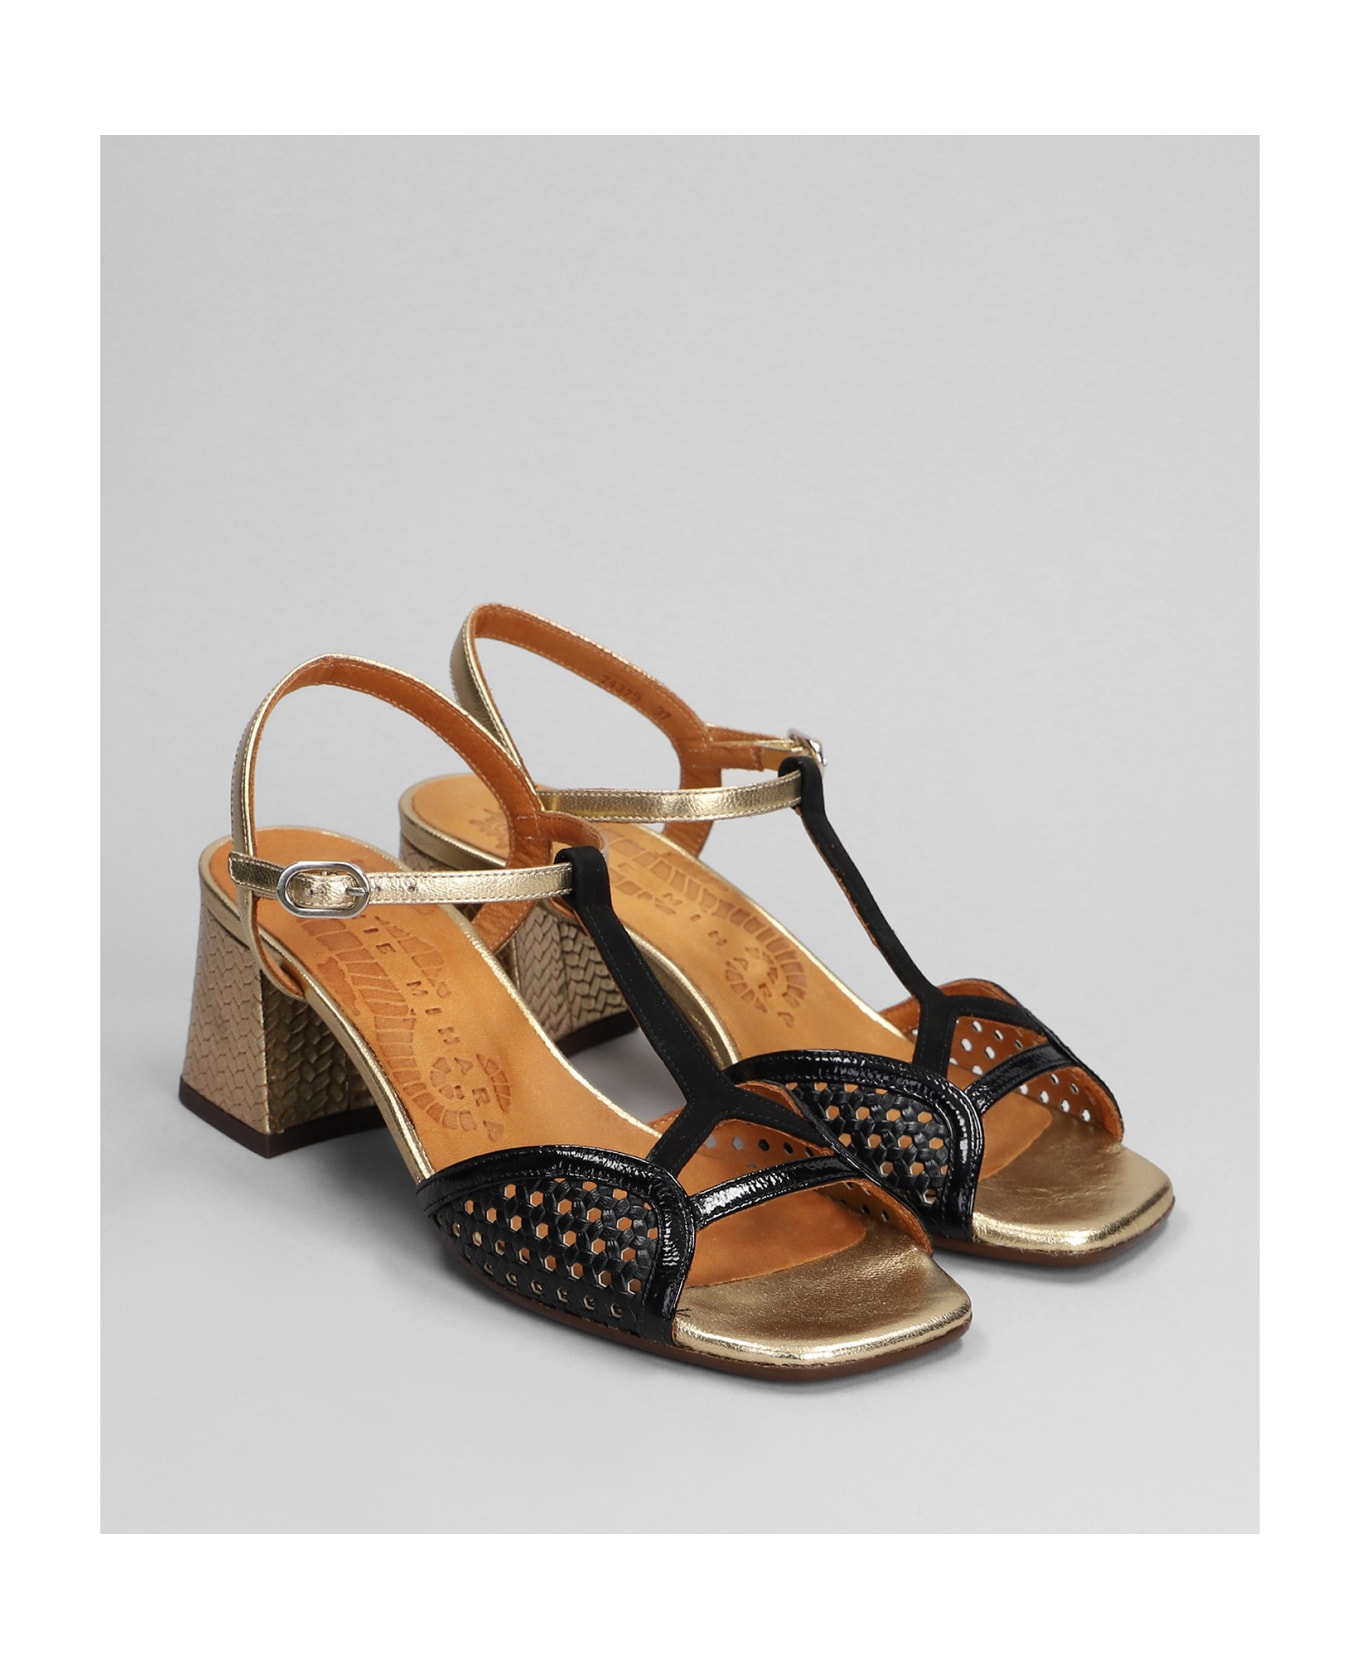 Chie Mihara Lipico Sandals In Black Leather - black